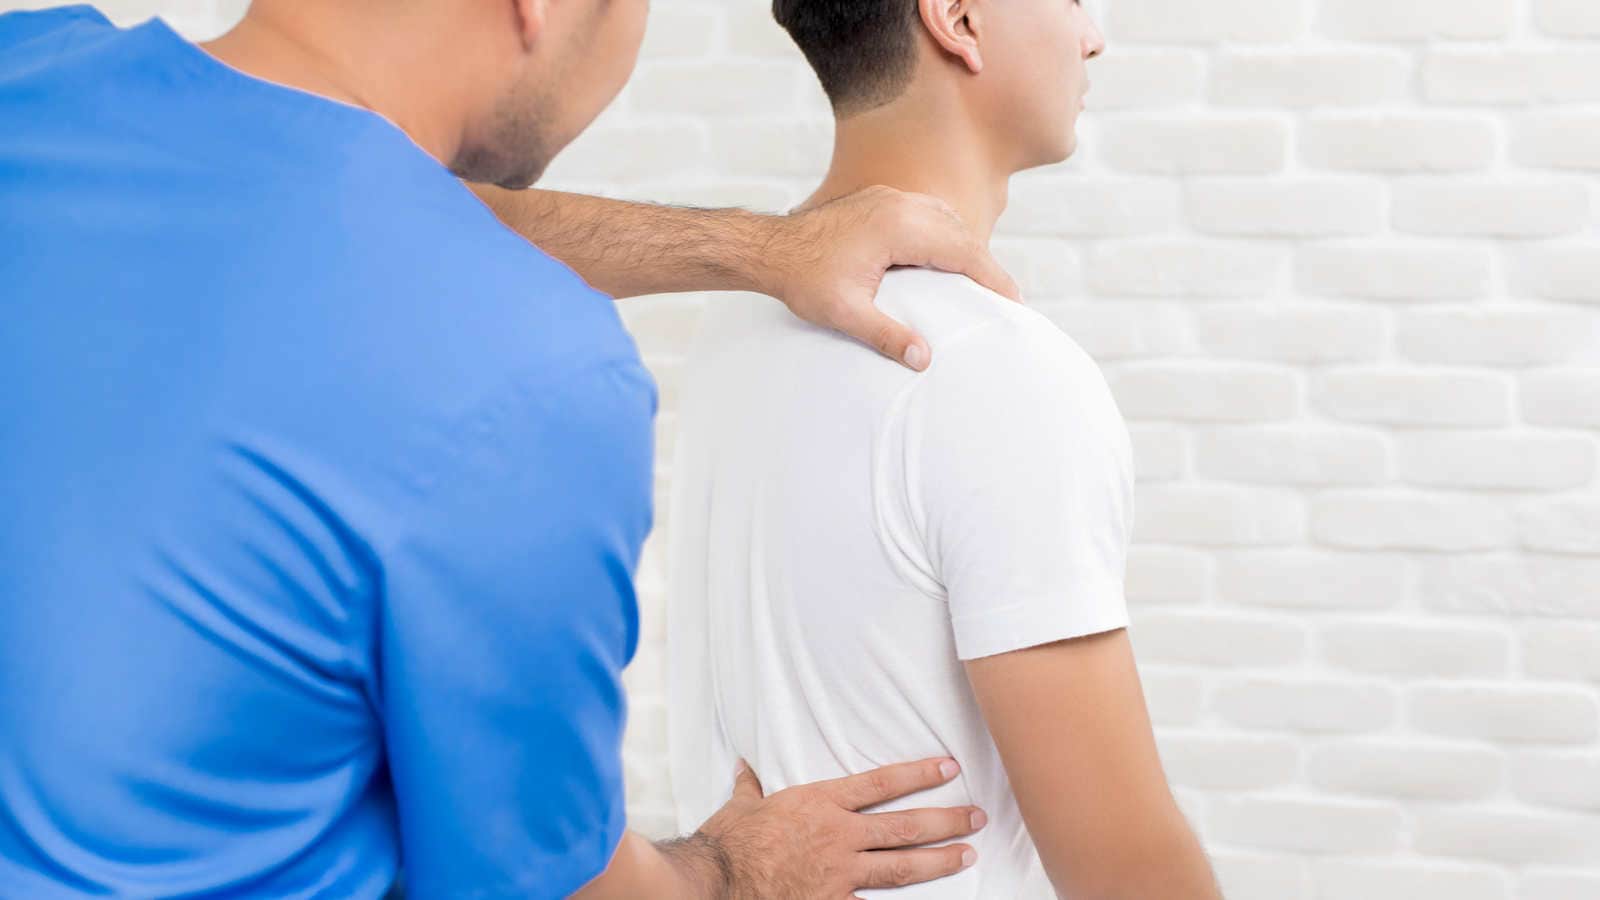 Whole Health Partners Chiropractic in Dallas